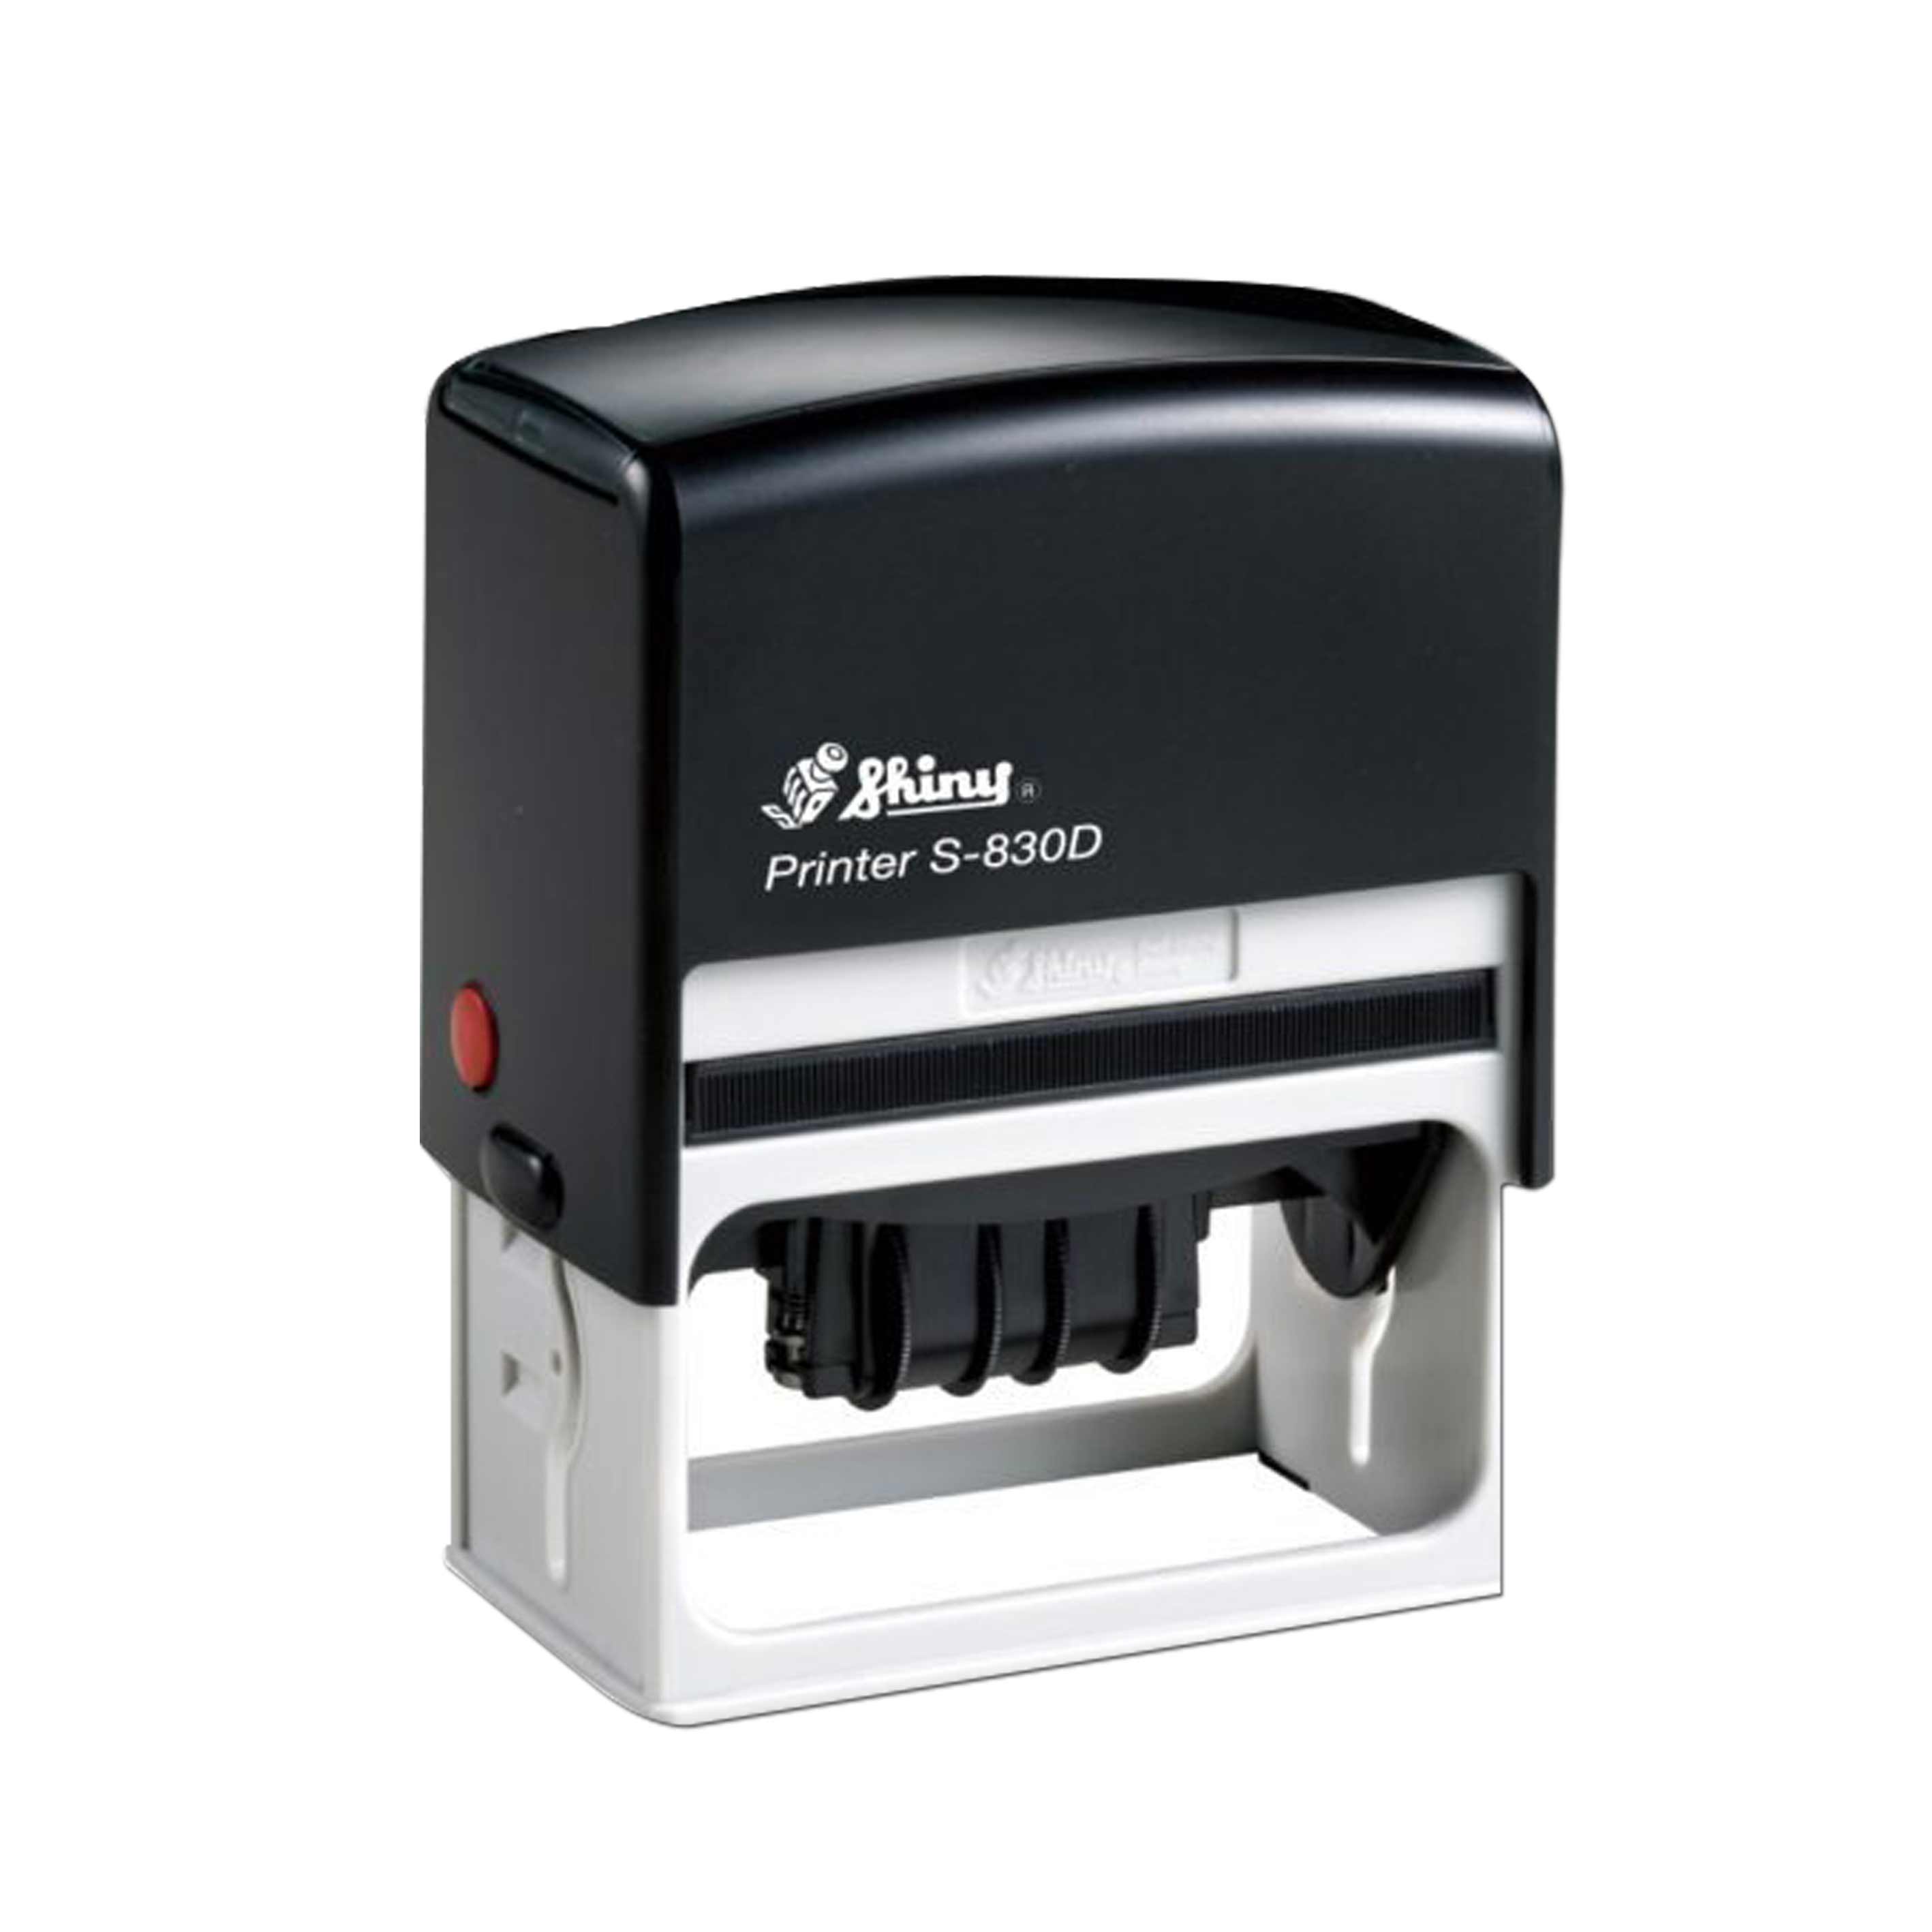 Personalized Dater Stamp Printer Ref S-830D, 75x38mm, Shiny